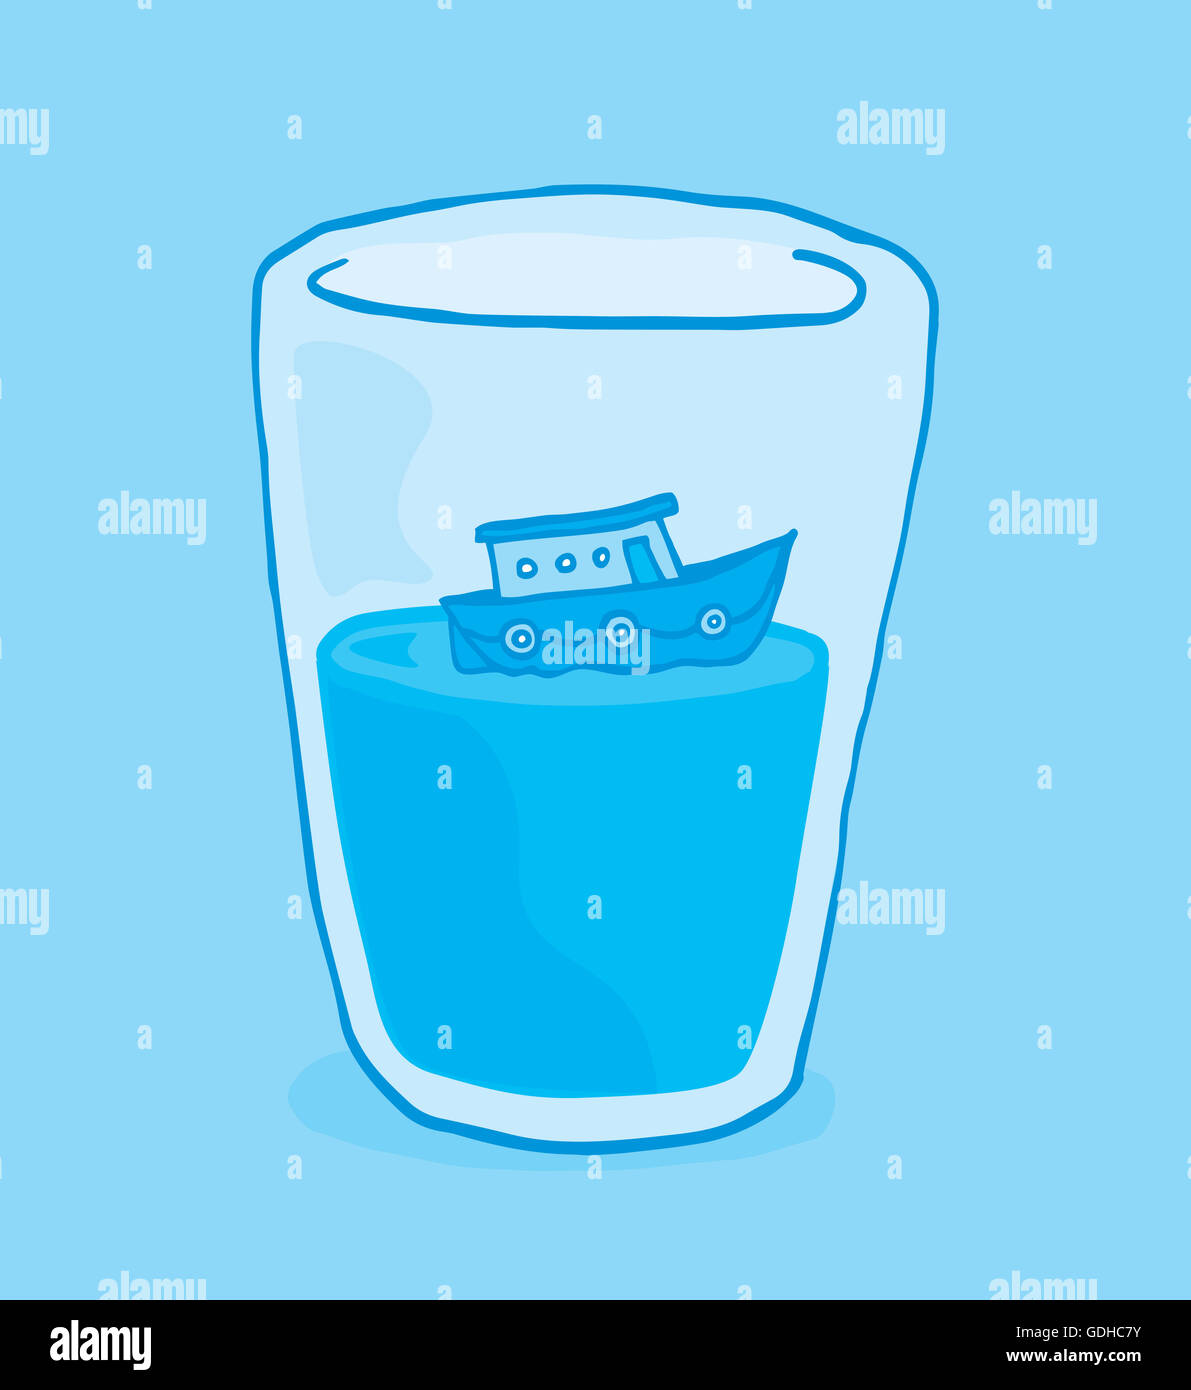 Cartoon illustration of miniature boat floating on glass of water Stock Photo